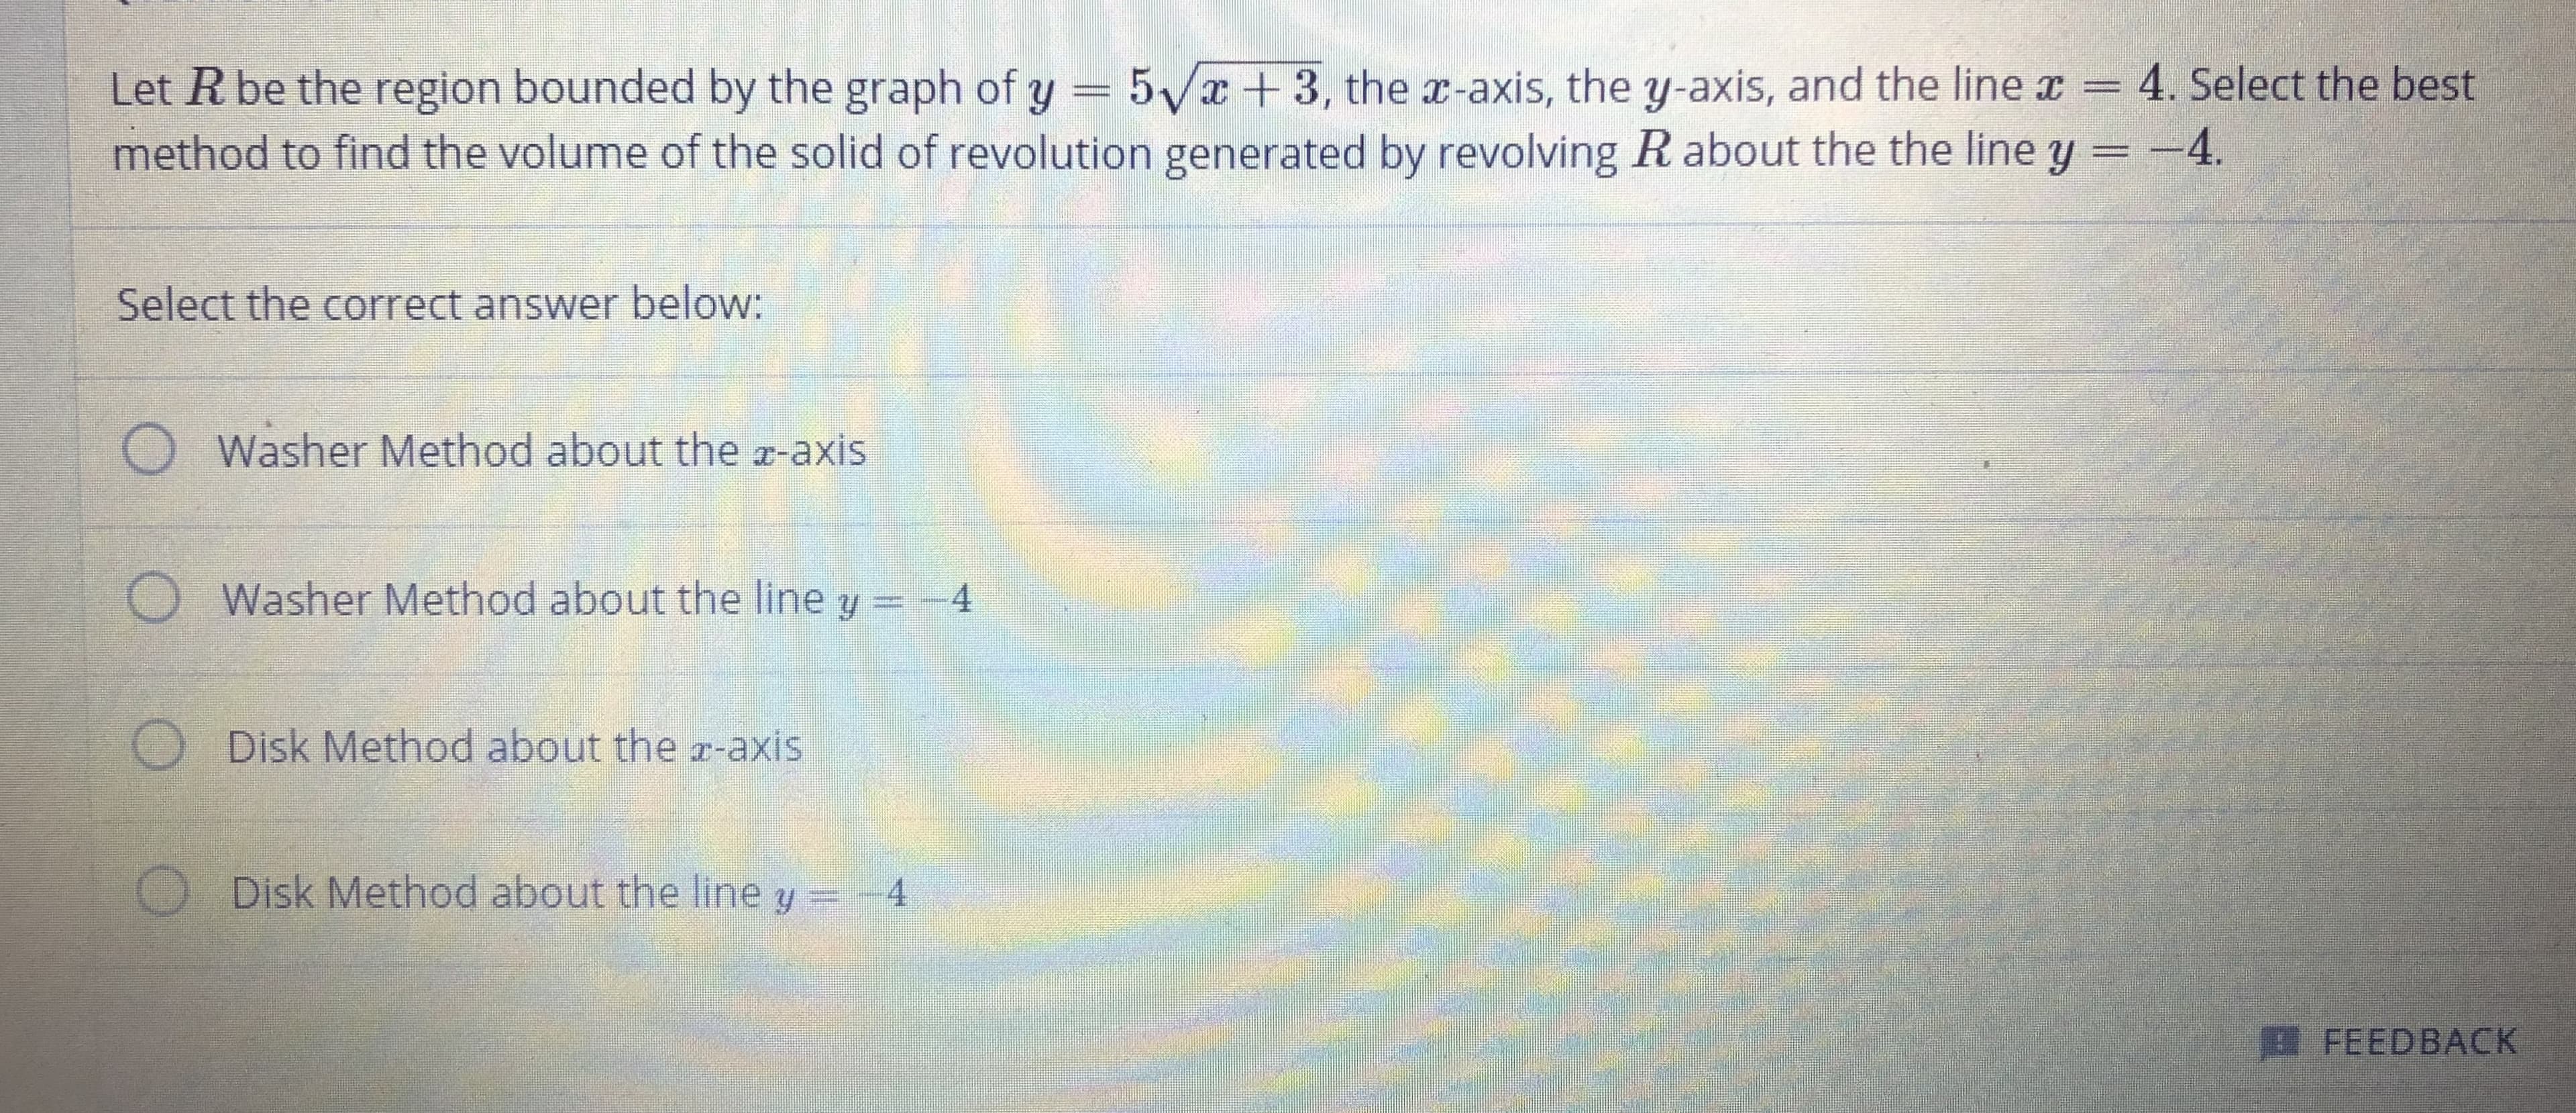 Let R be the region bounded by the graph of y = 5Vx+3, the a-axis, the y-axis, and the line x = 4. Select the best
method to find the volume of the solid of revolution generated by revolving R about the the line y =-4.
